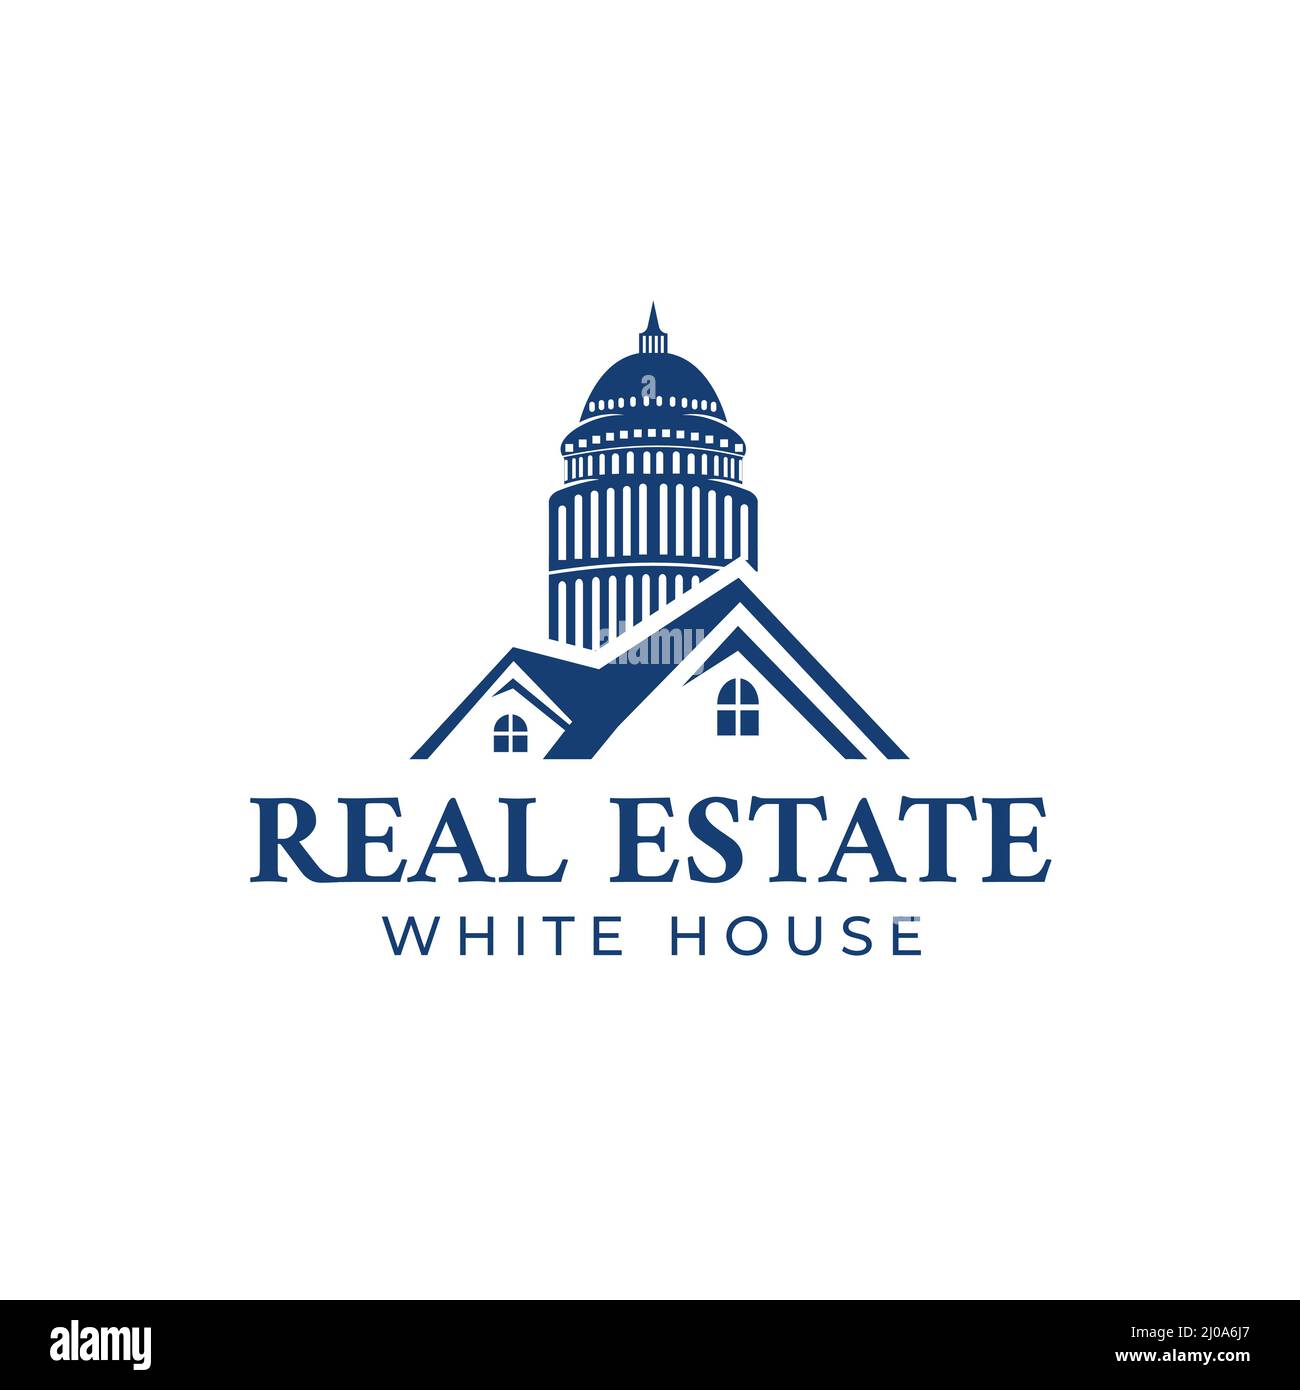 Home roof design logo for real estate business and high rise building white building design template Stock Vector